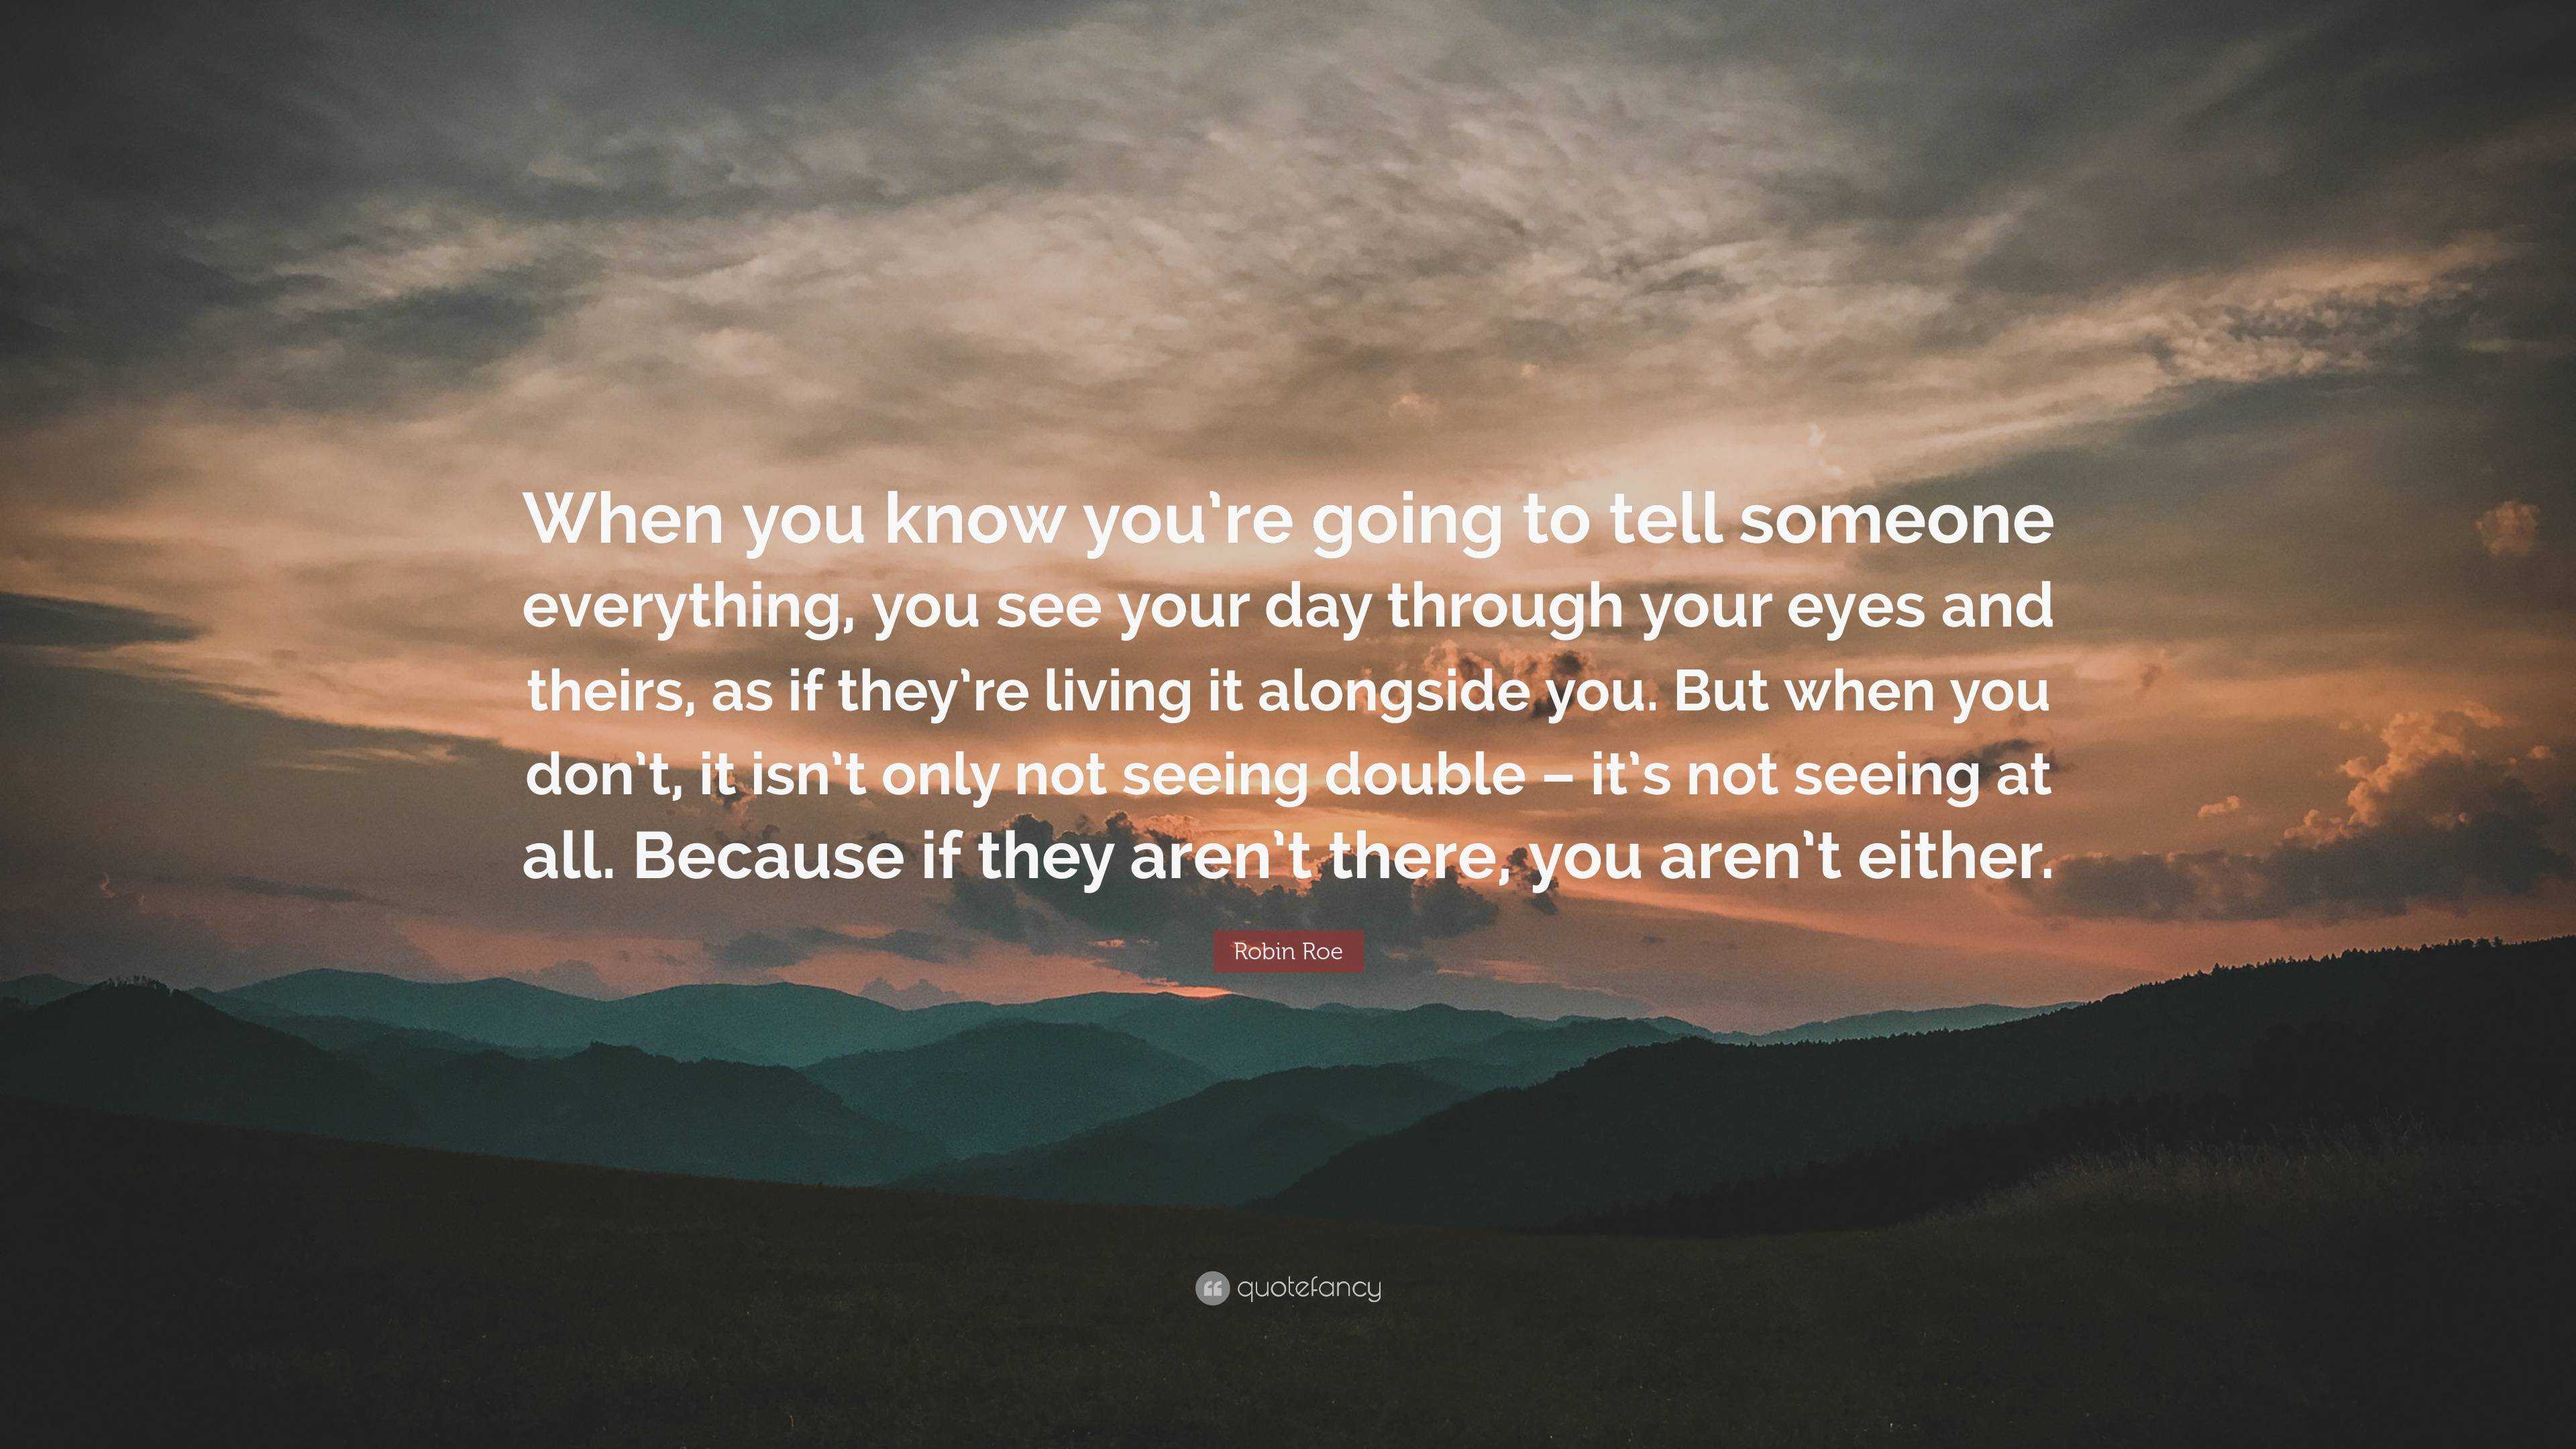 Robin Roe Quote: “When you know you’re going to tell someone everything ...